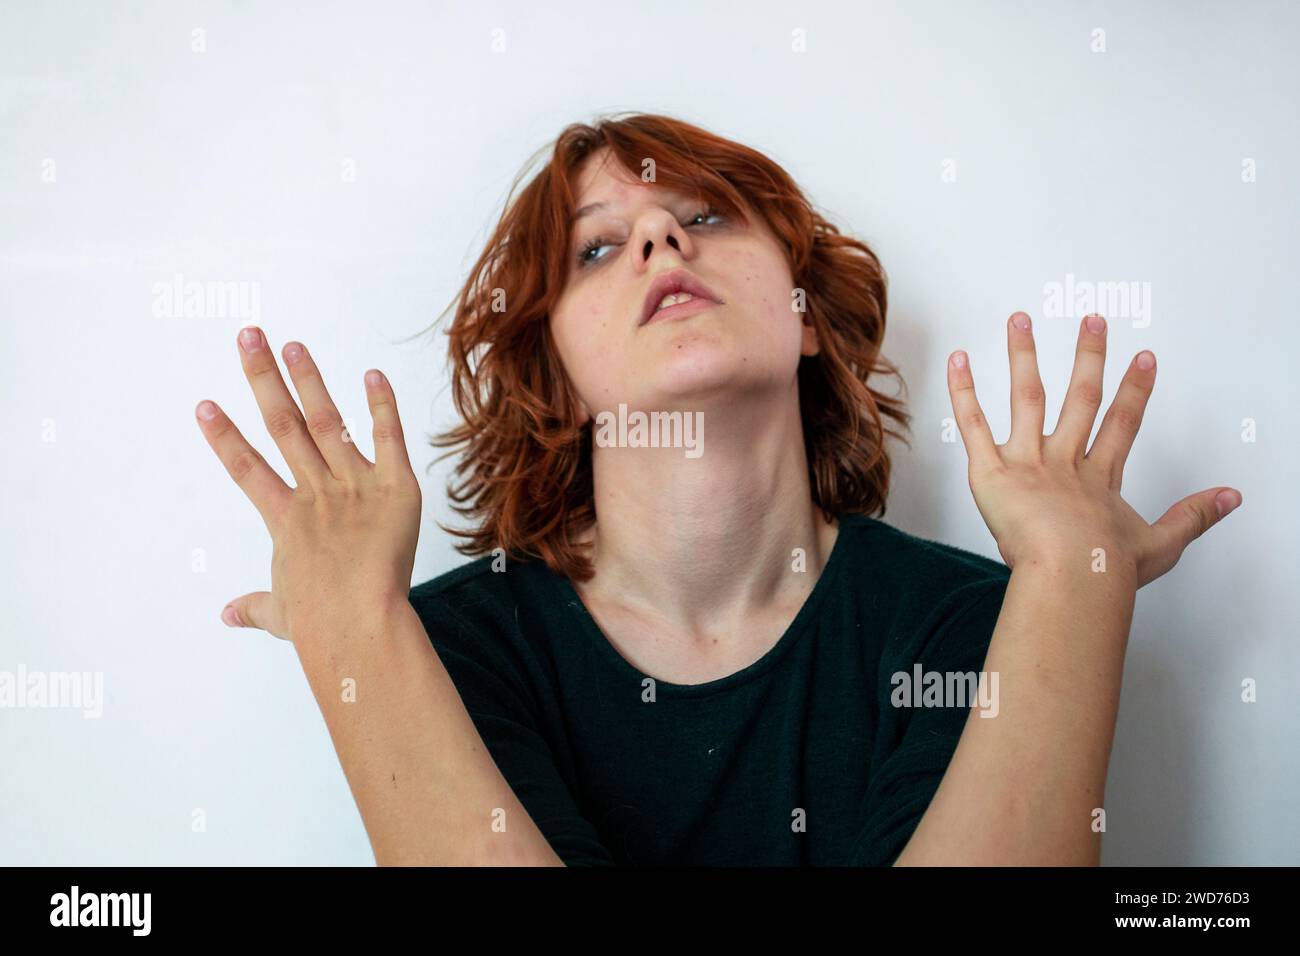 beautiful teenage girl with a stylish short anime hairstyle on a light background Stock Photo